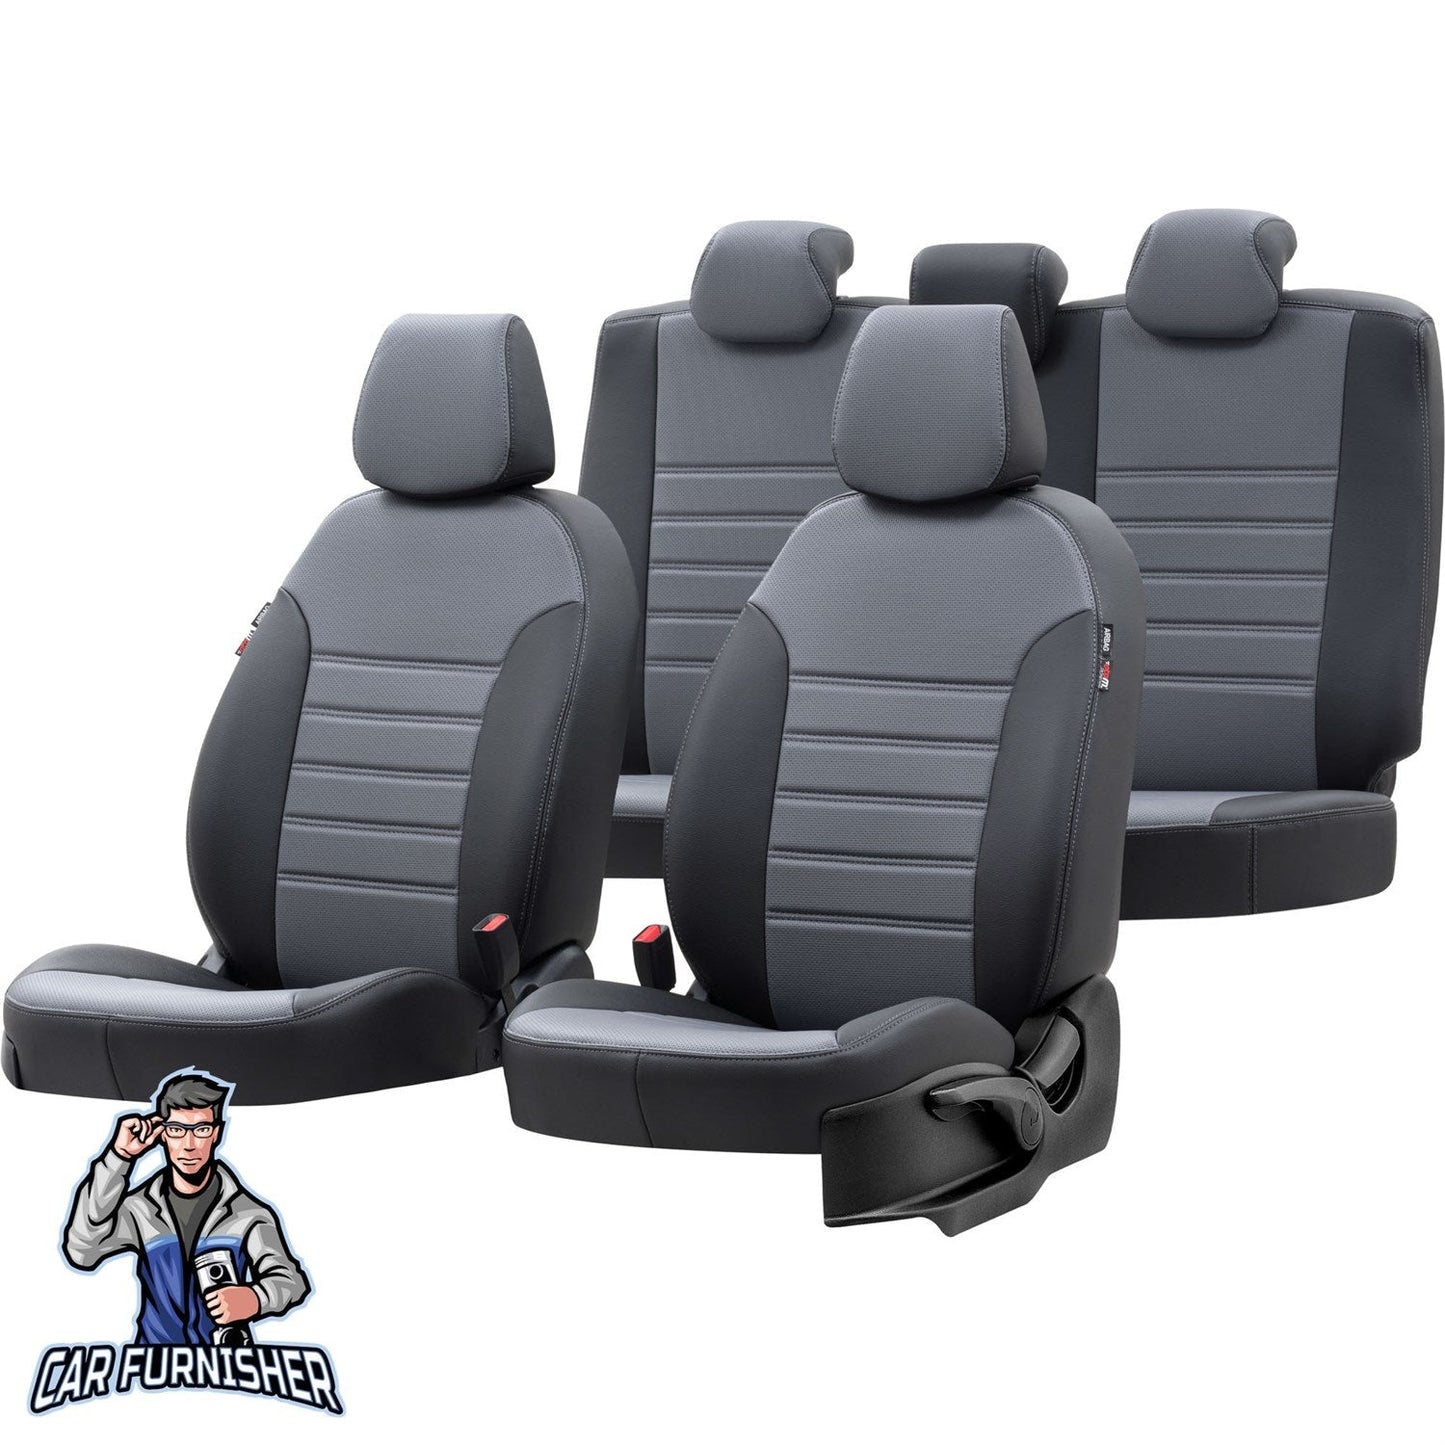 Seat Leon Seat Covers New York Leather Design Smoked Black Leather